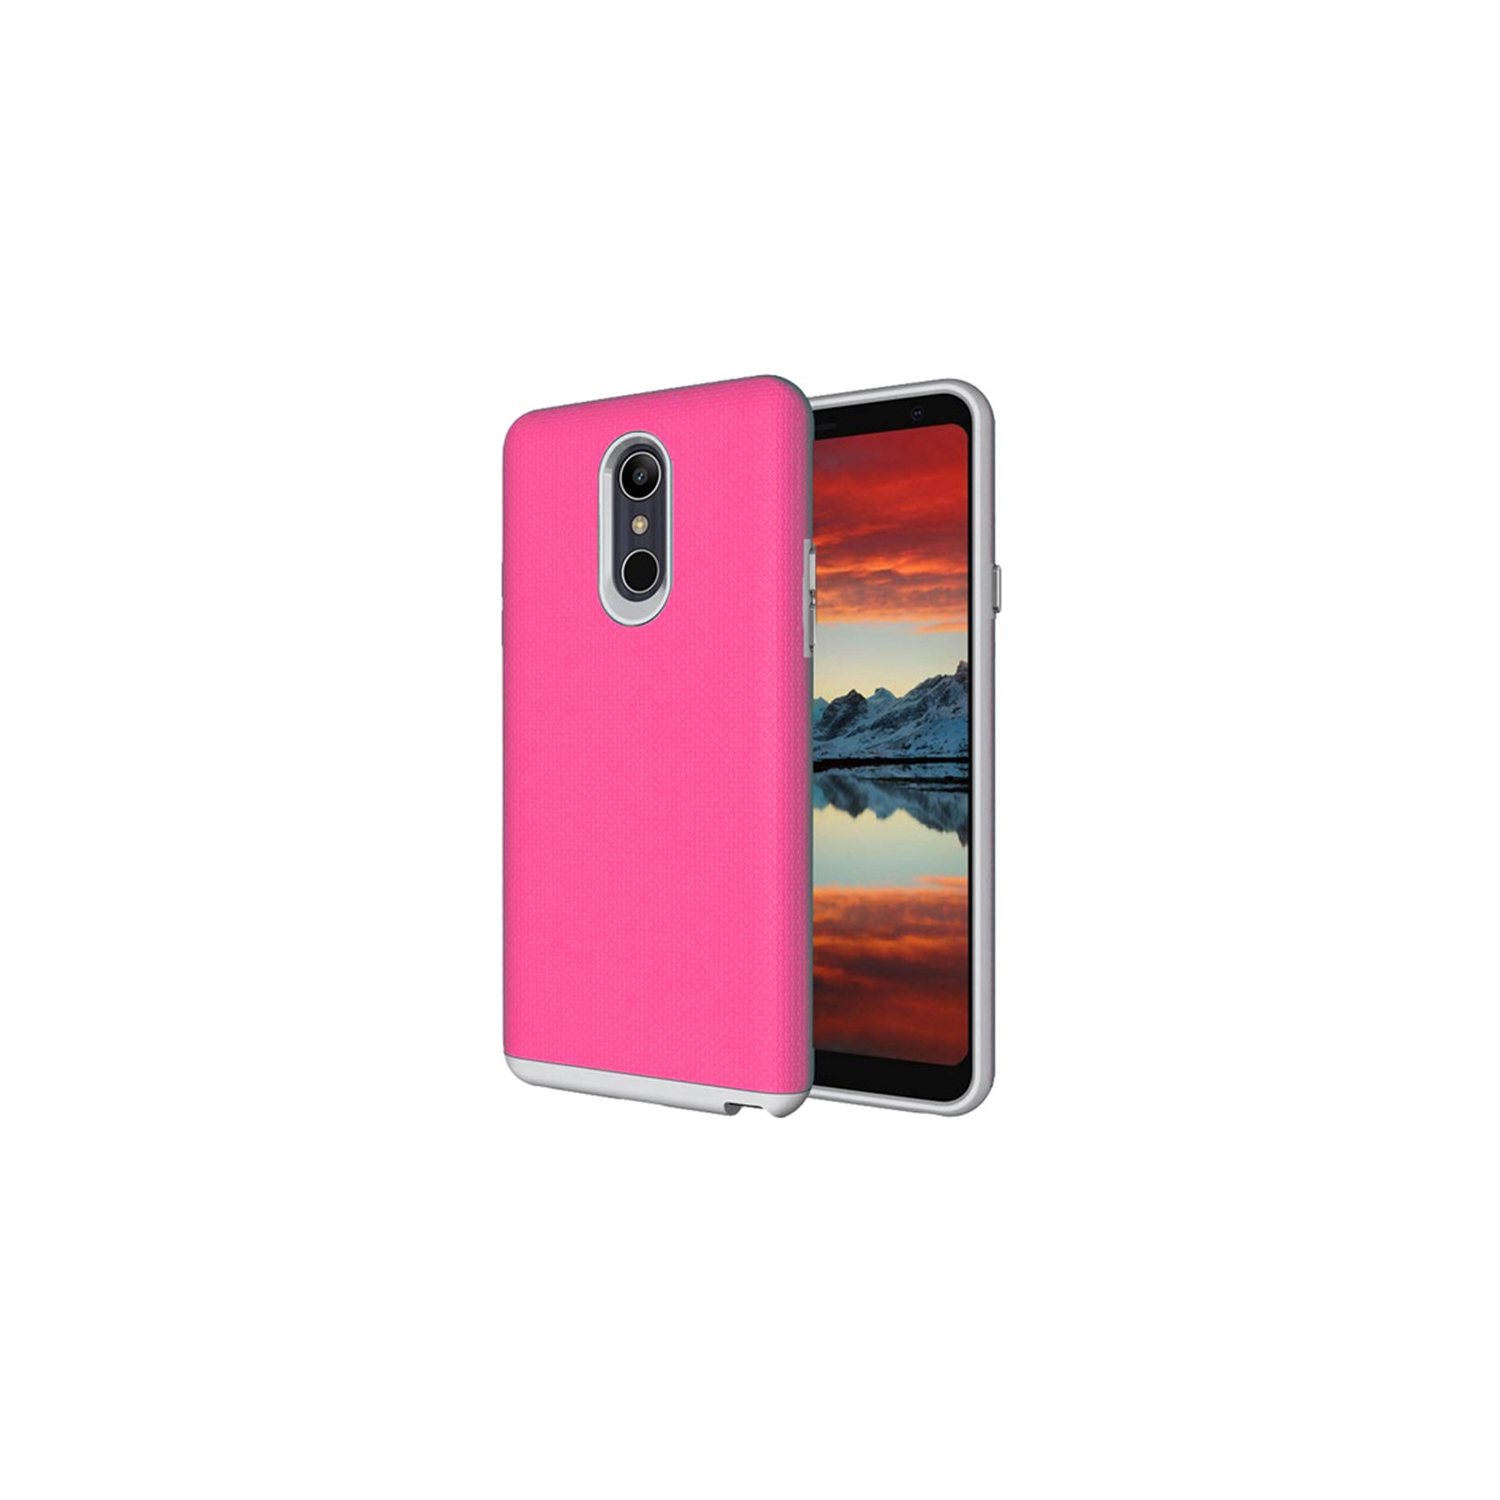 【CSmart】 Slim Fitted Hybrid Hard PC Shell Shockproof Scratch Resistant Case Cover for LG Q Stylo Plus, Hot Pink